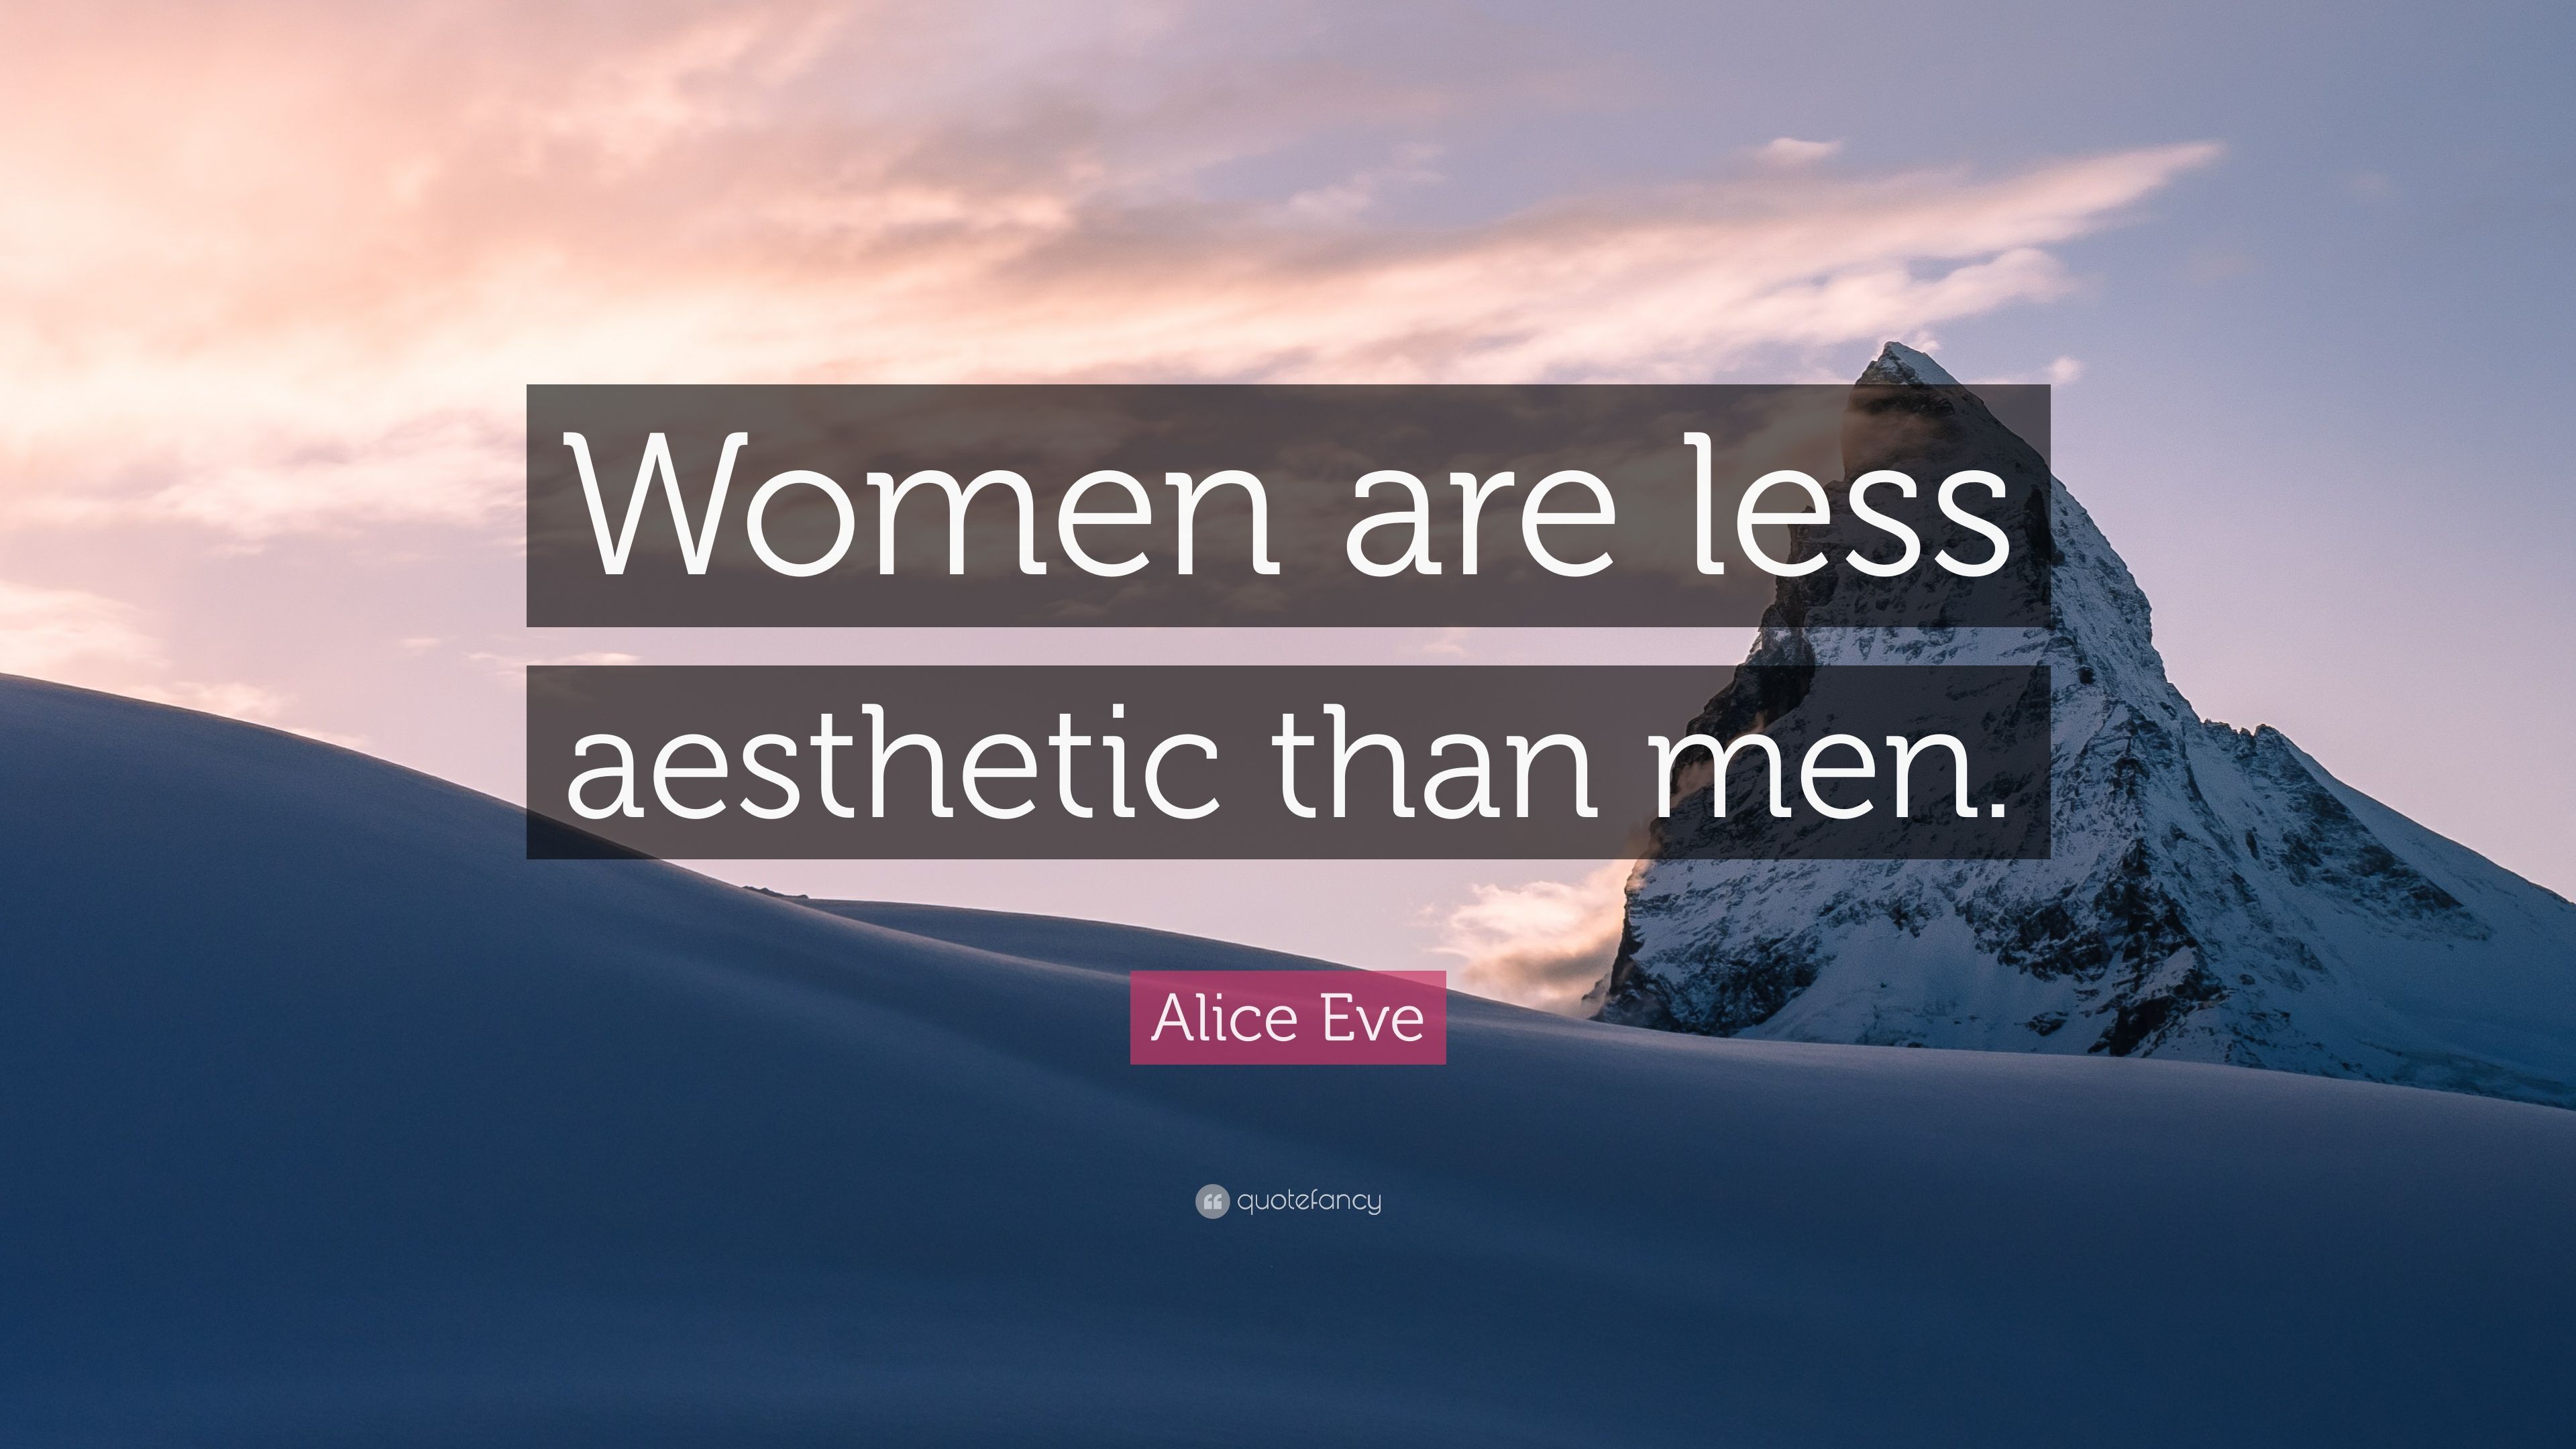 Alice Eve Quote: “Women are less aesthetic than men.” (7 wallpaper)